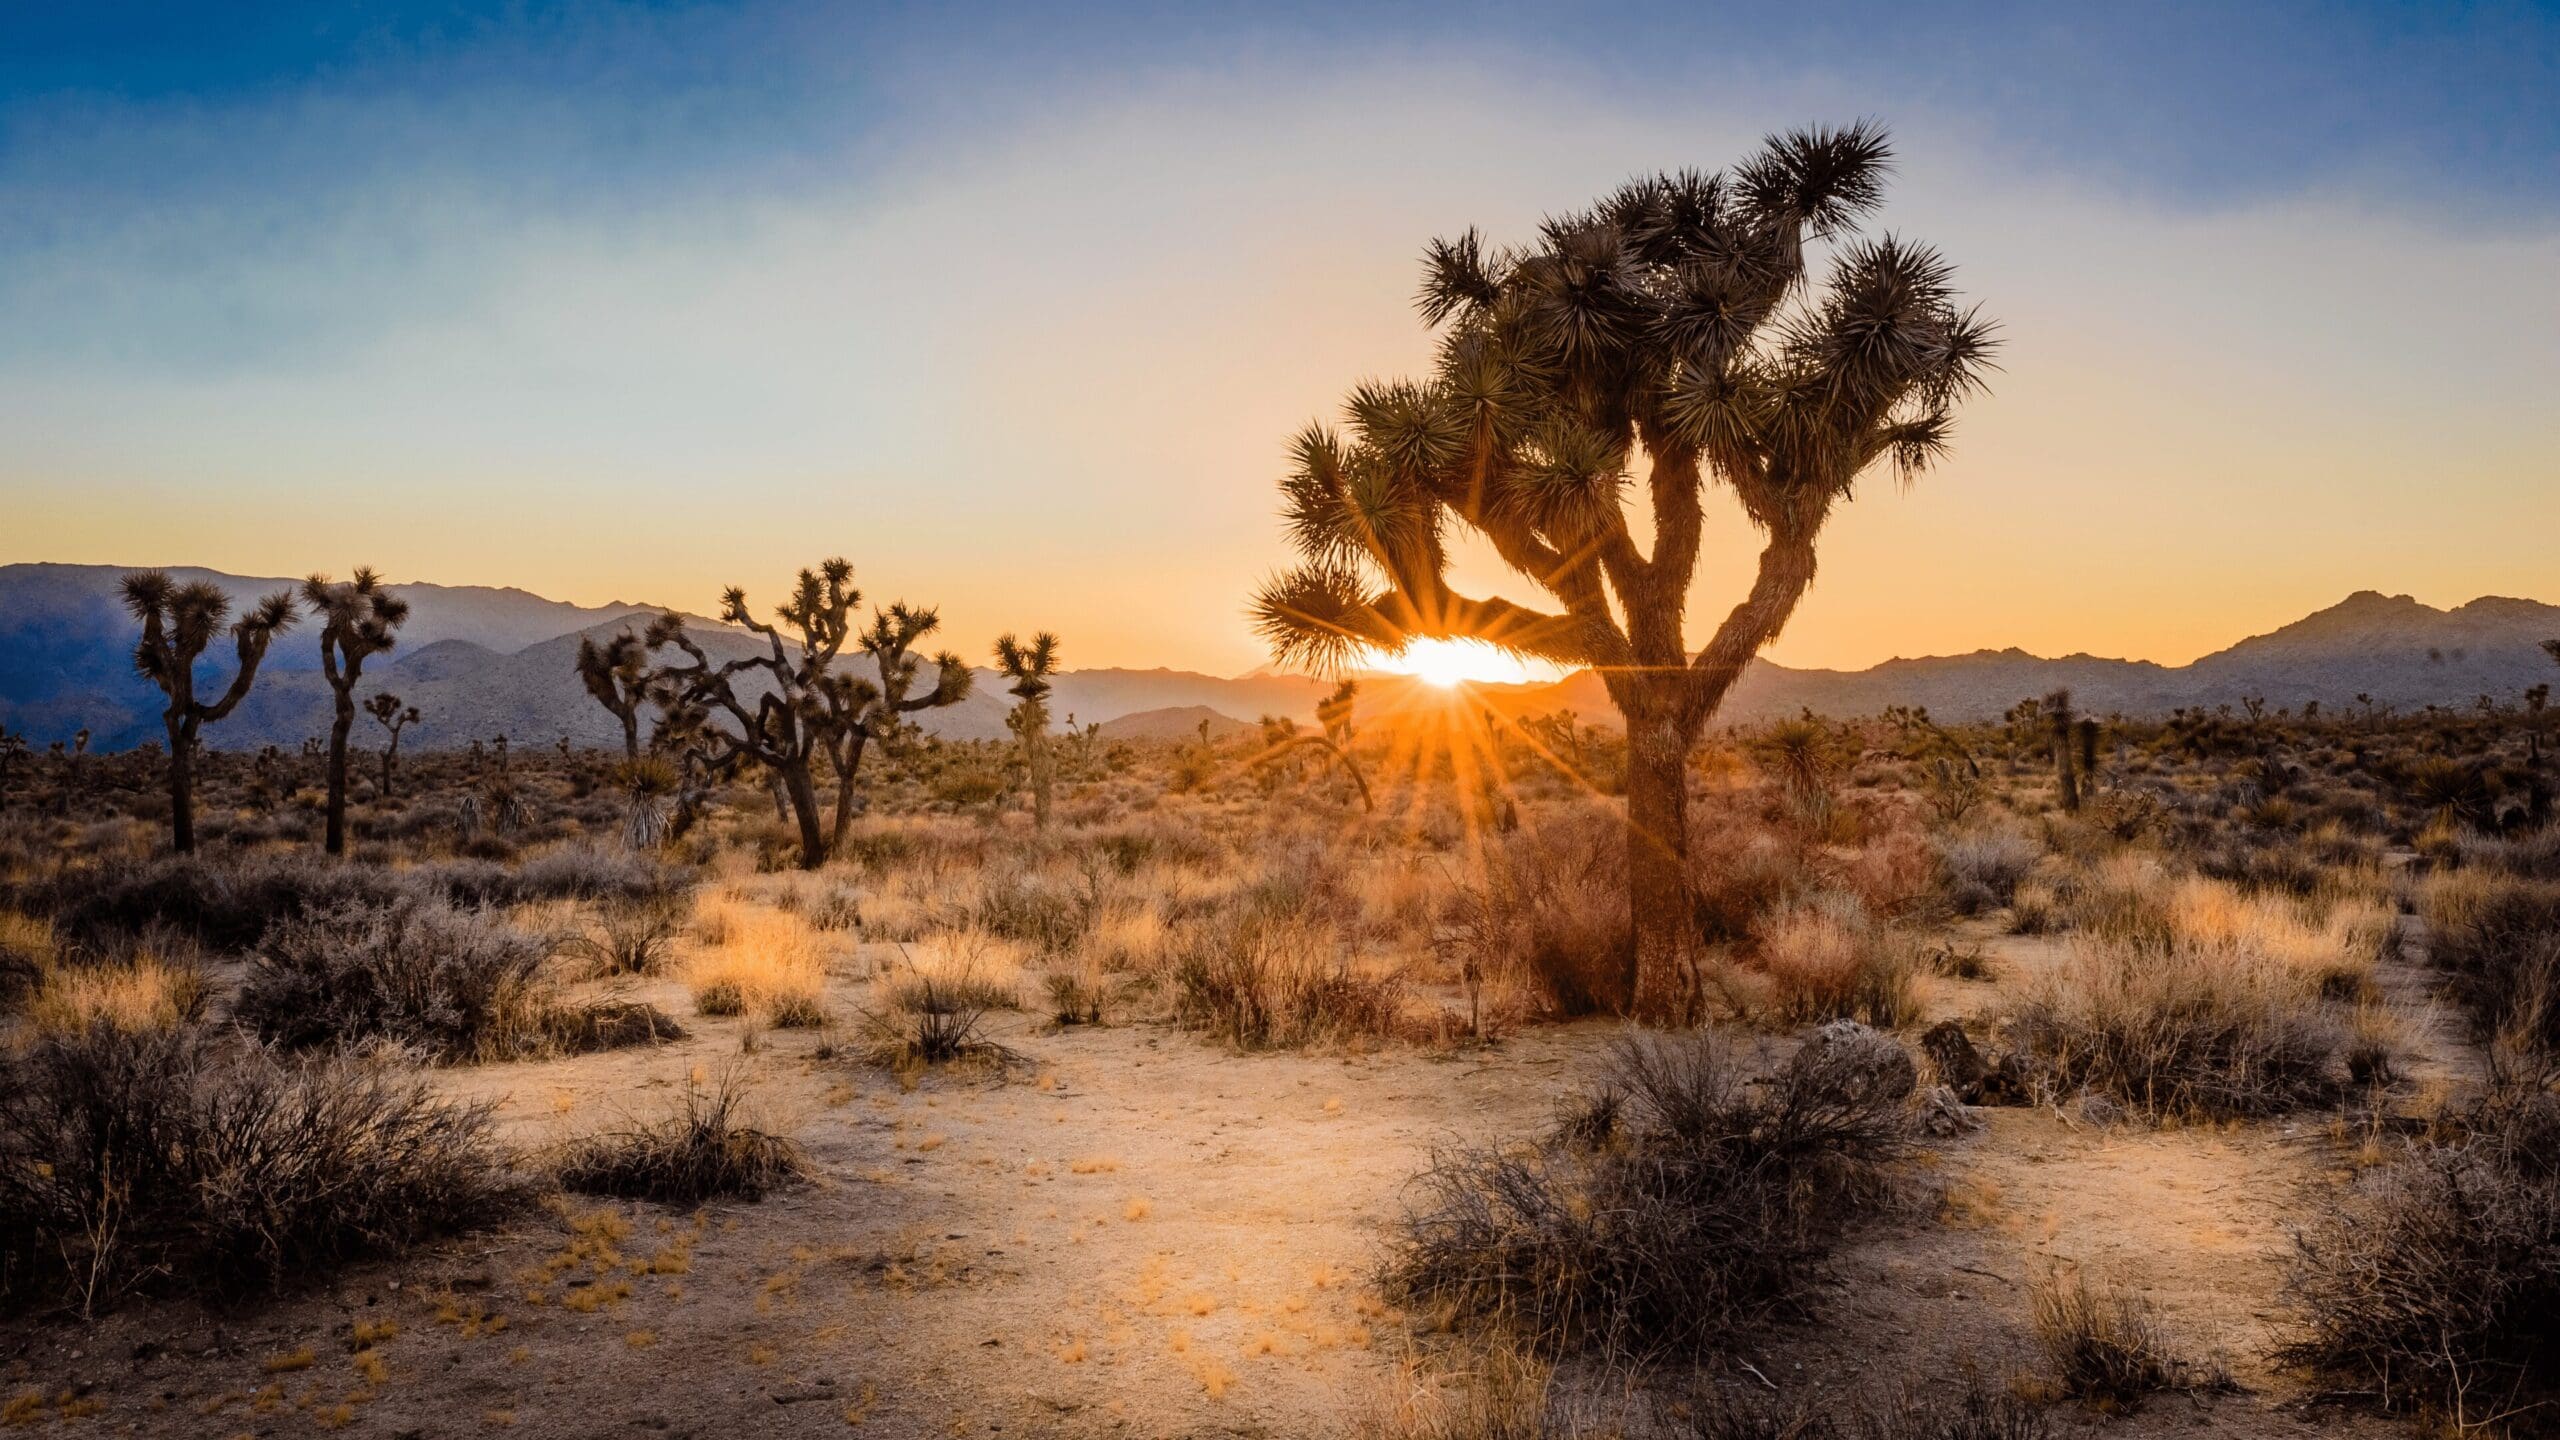 joshua trees scattered in desert area with sunset in rear